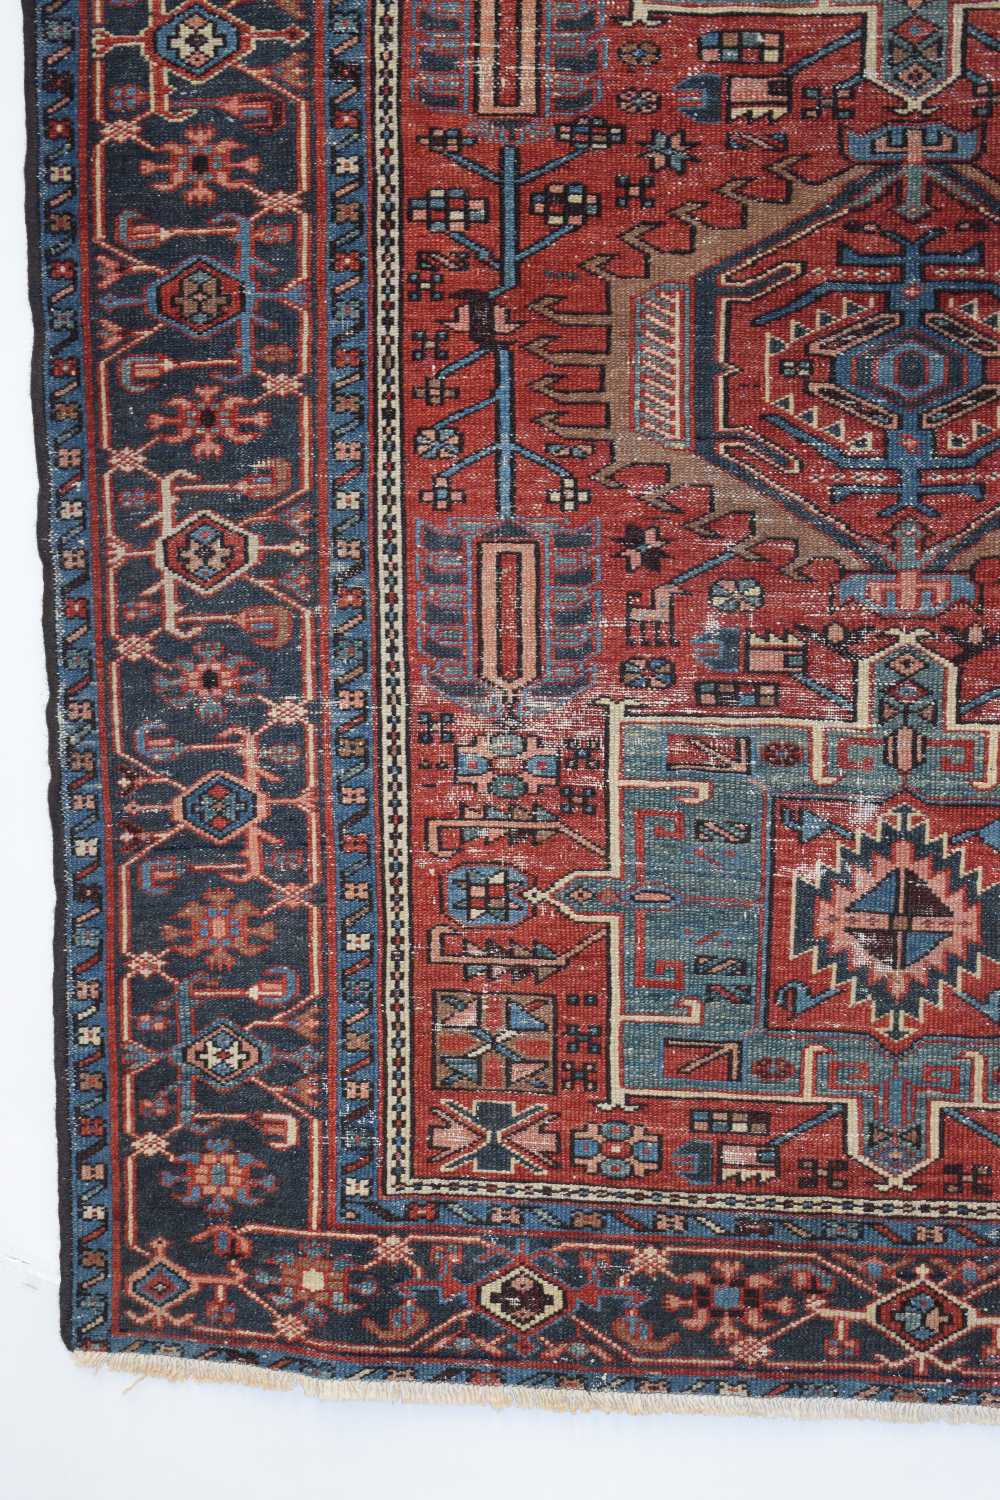 Karaja rug, north west Persia, circa 1930s-40s, 5ft. 11in. X 4ft. 11in. 1.80m. X 1.50m. Overall - Image 5 of 9